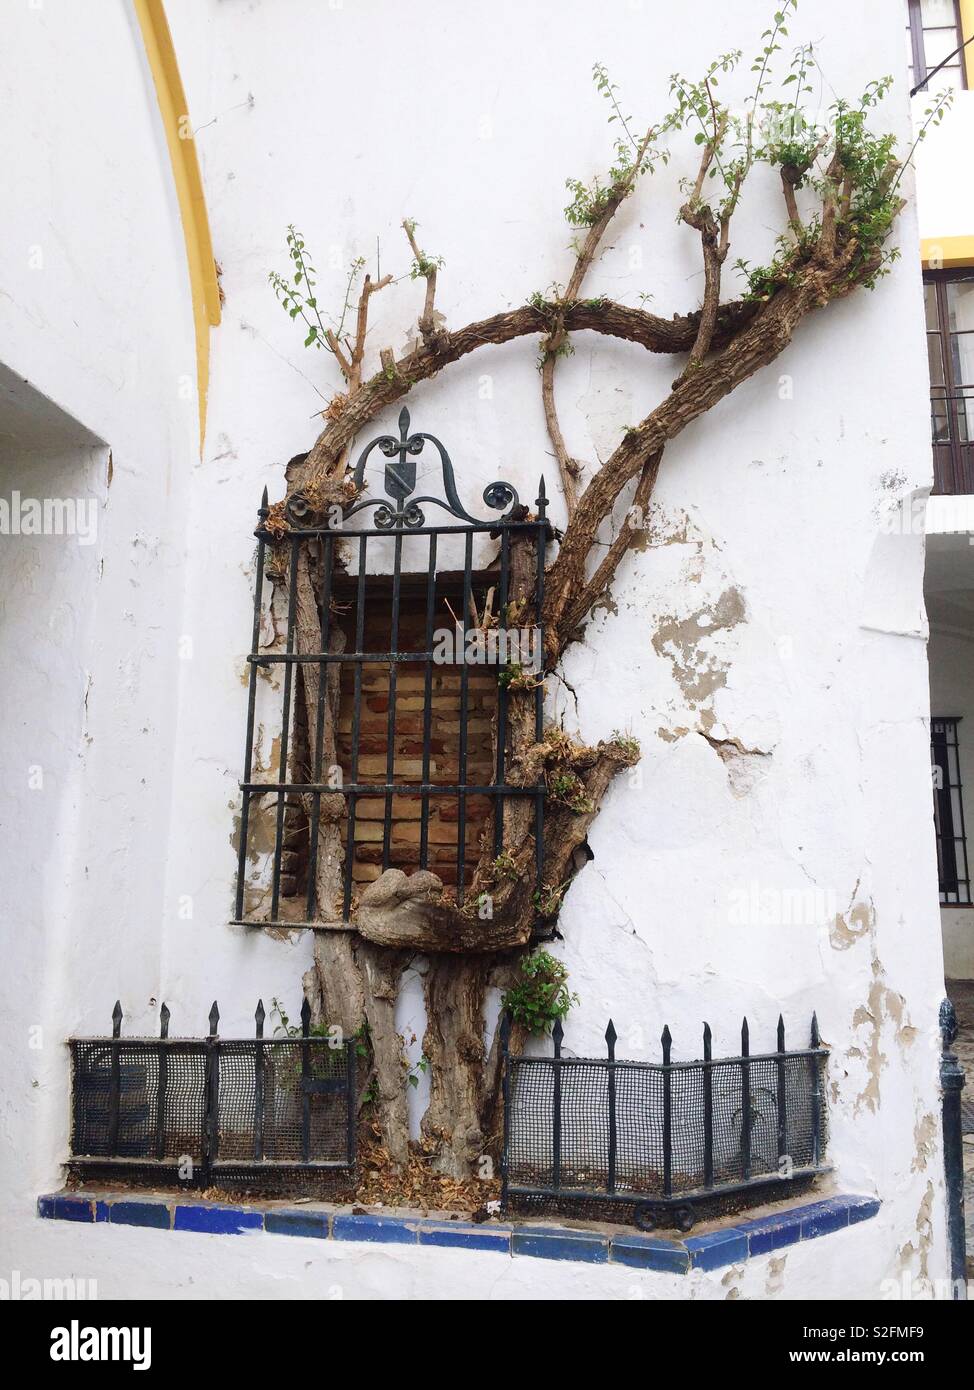 Window bricked up and decorative metal bars surrounding it with pruned tree around it Seville Spain Stock Photo